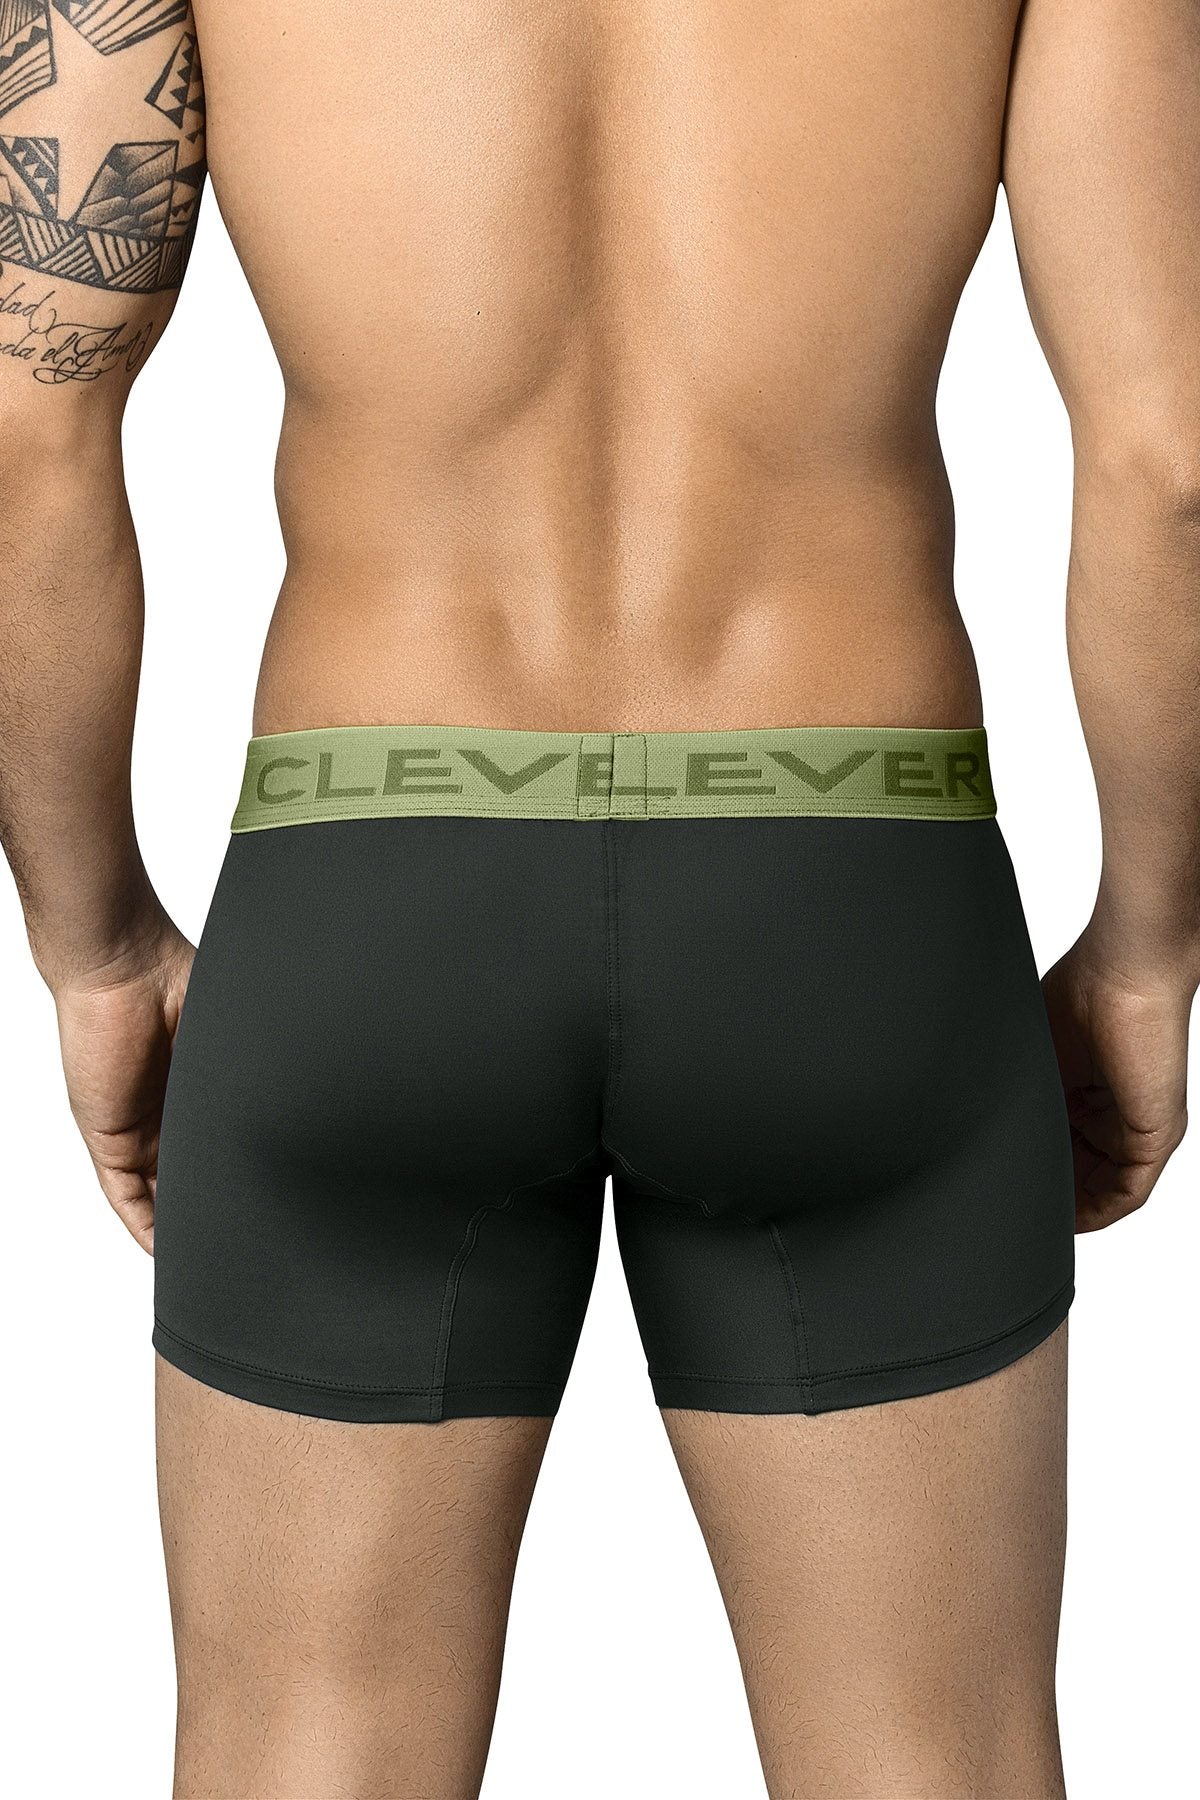 Clever Black/Green Exclusive Trunk